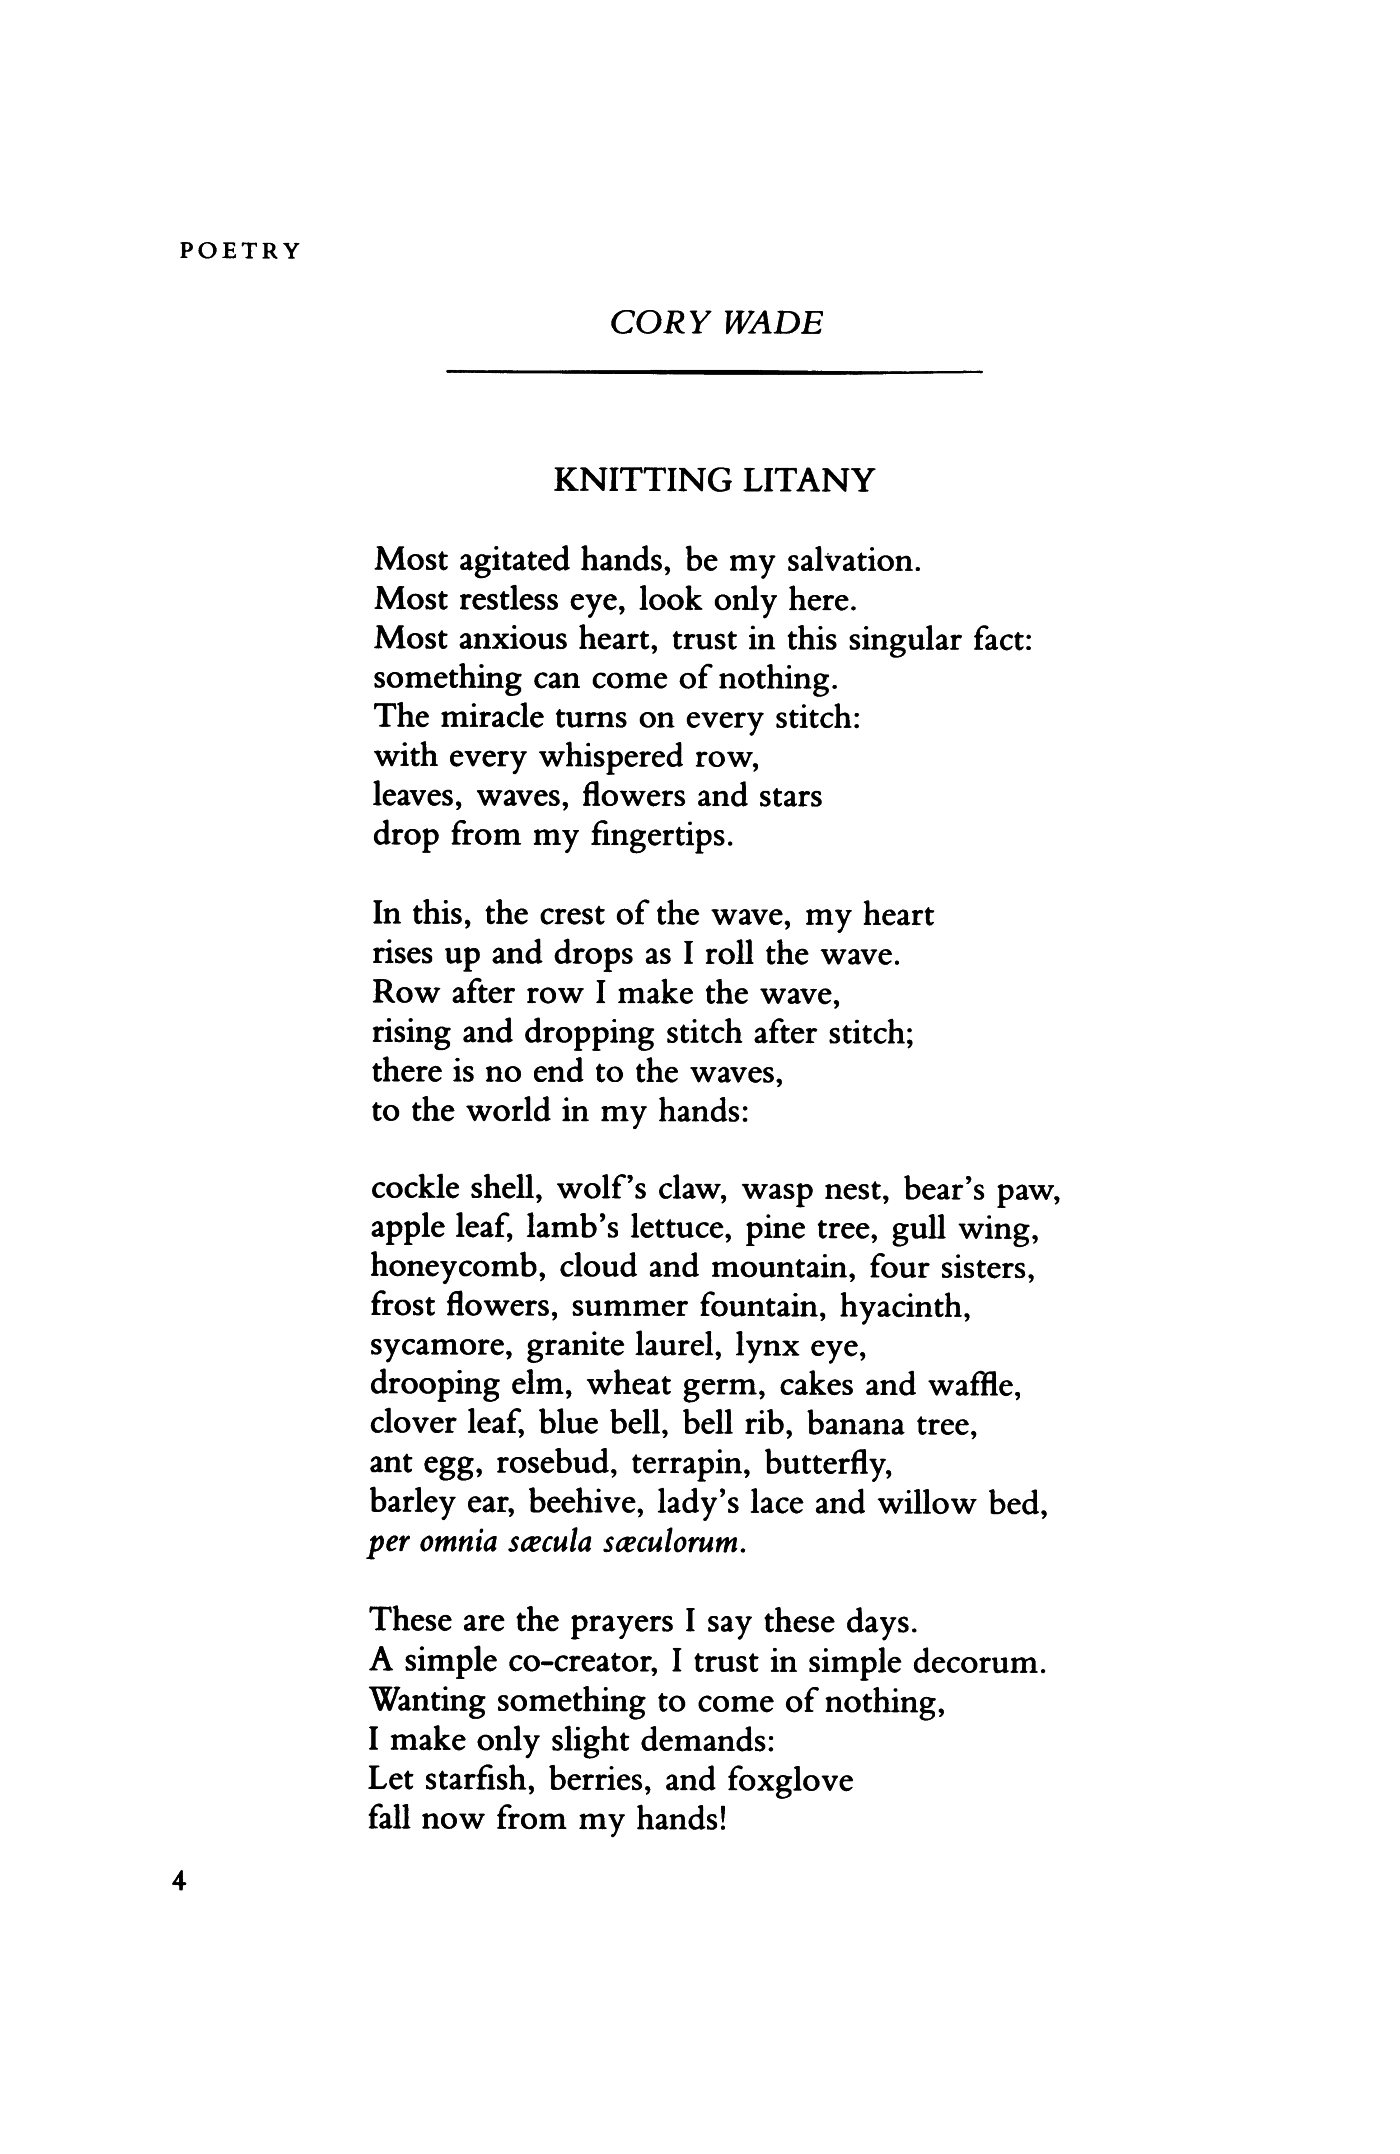 Poem,   Knitting Litany   ,  from the October 1990 issue of  Poetry  magazine.